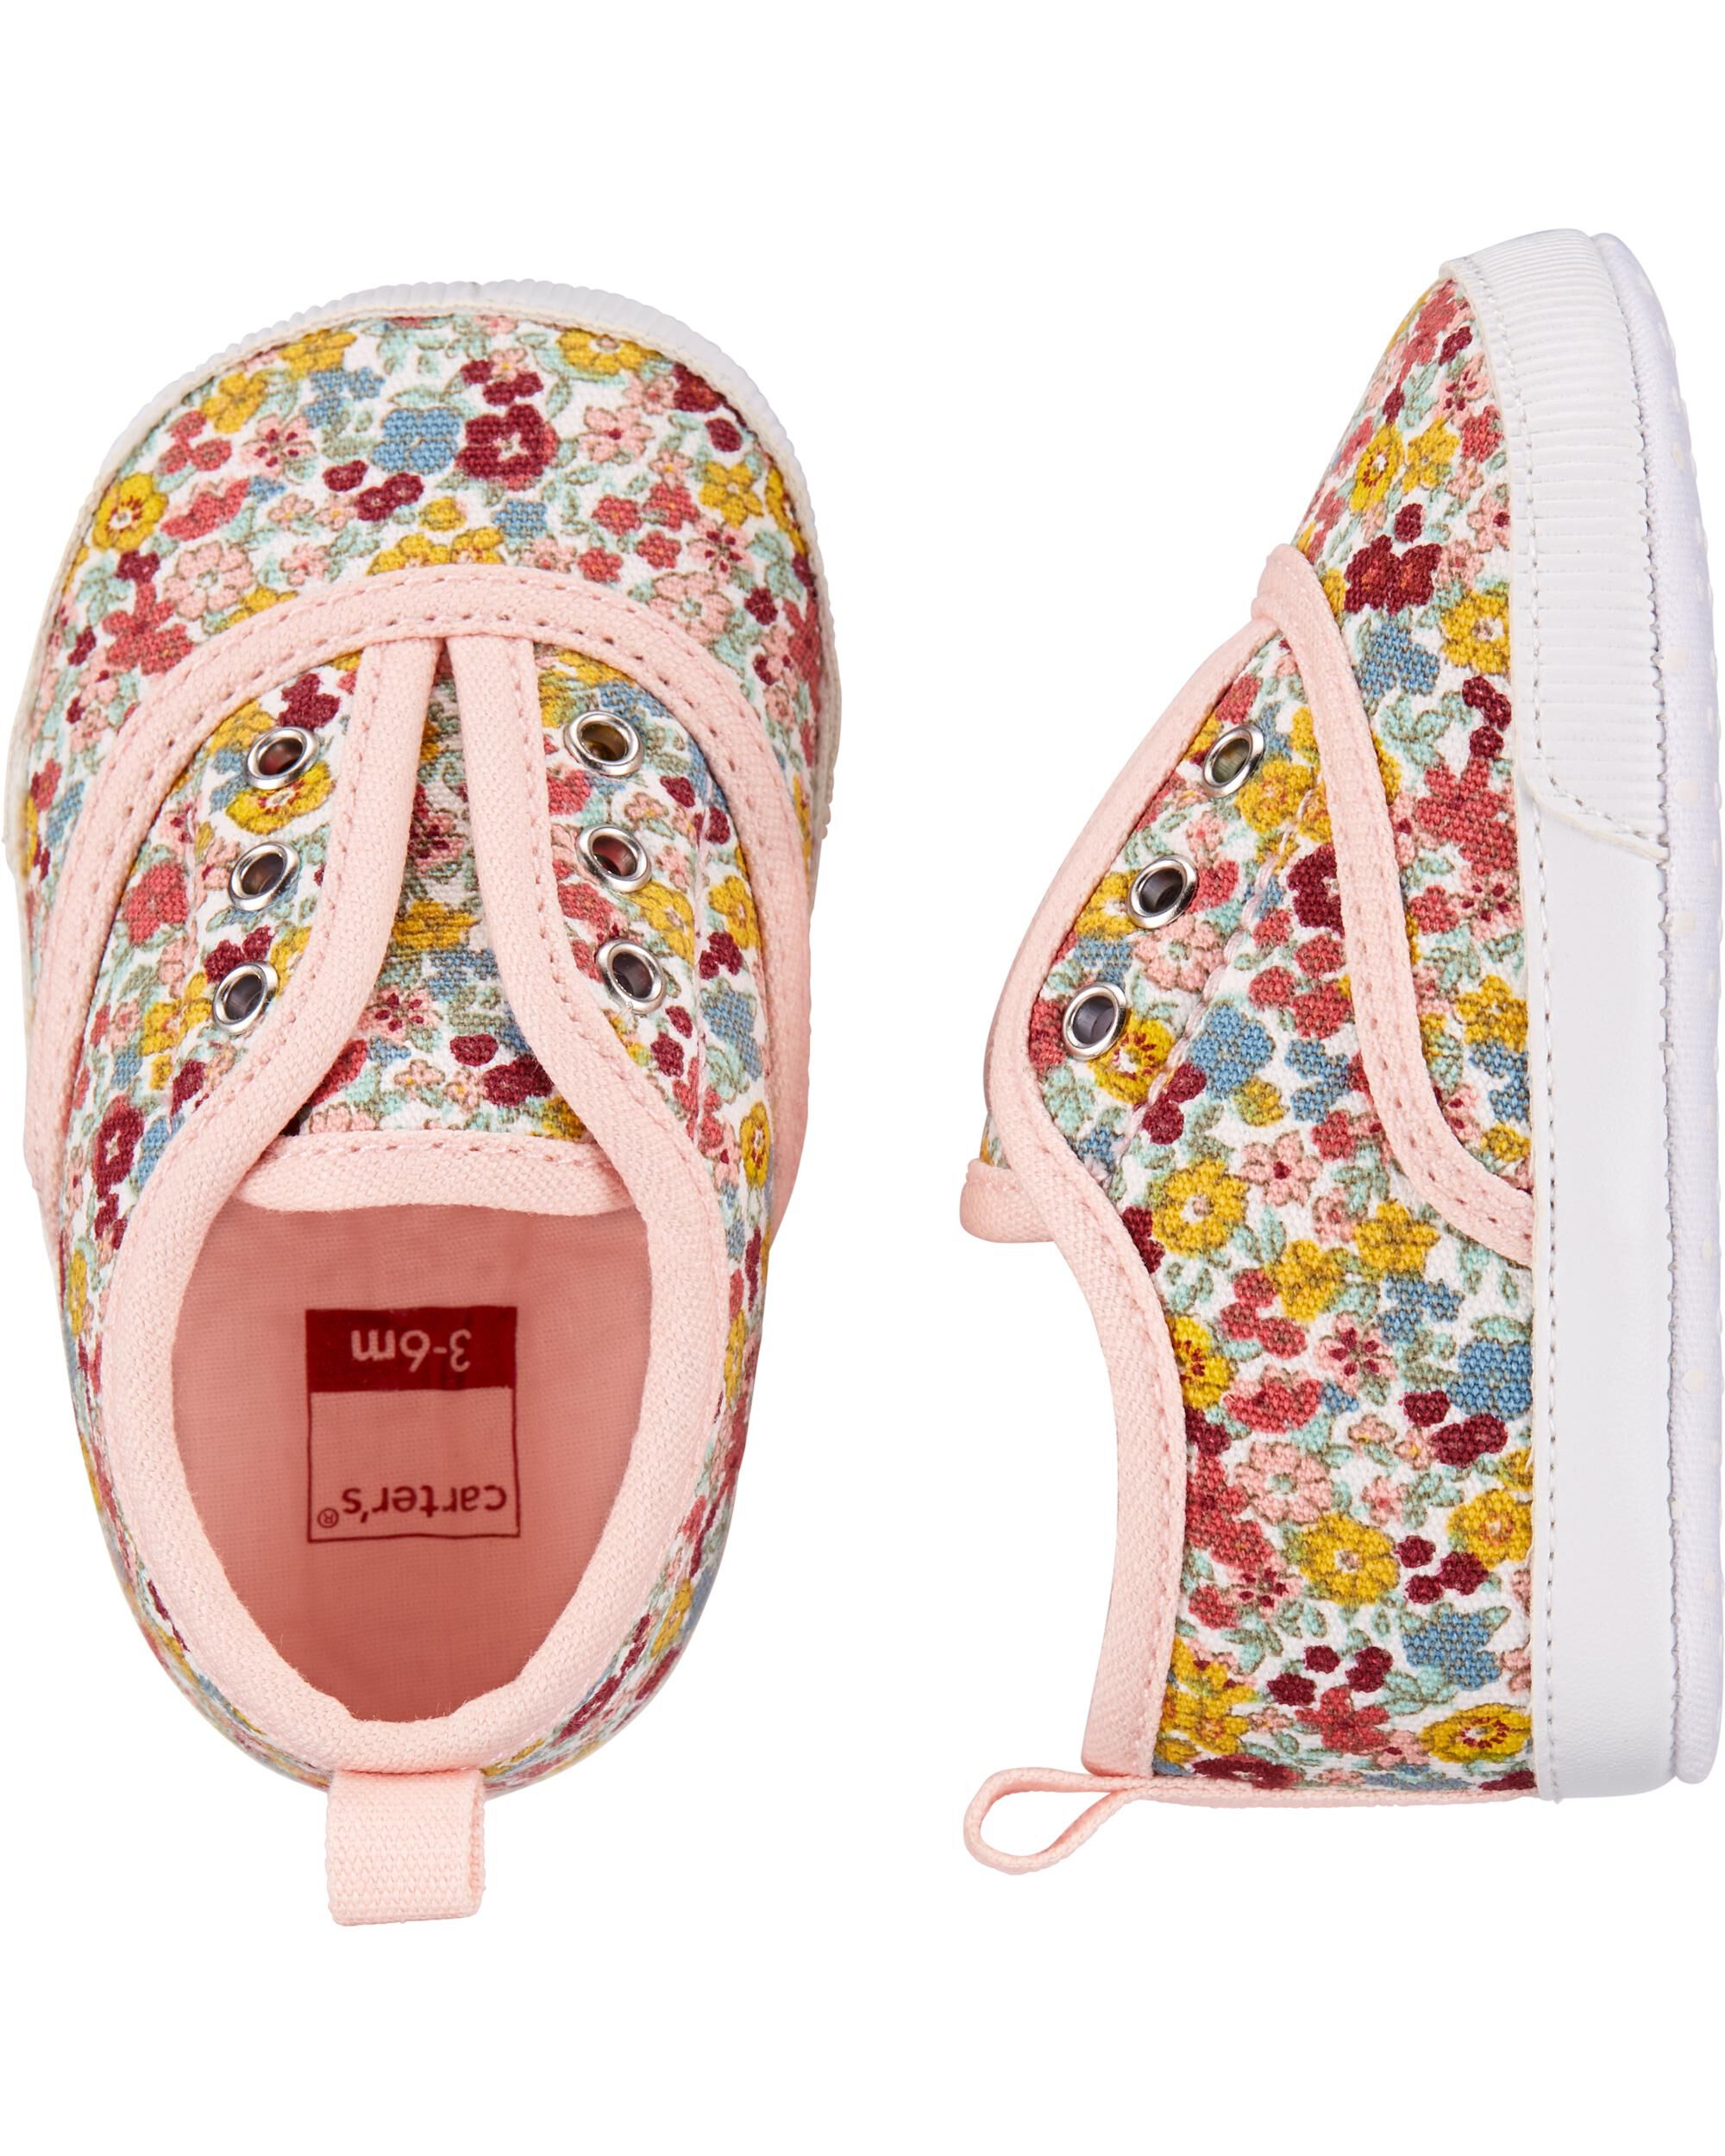 cute baby girl shoes